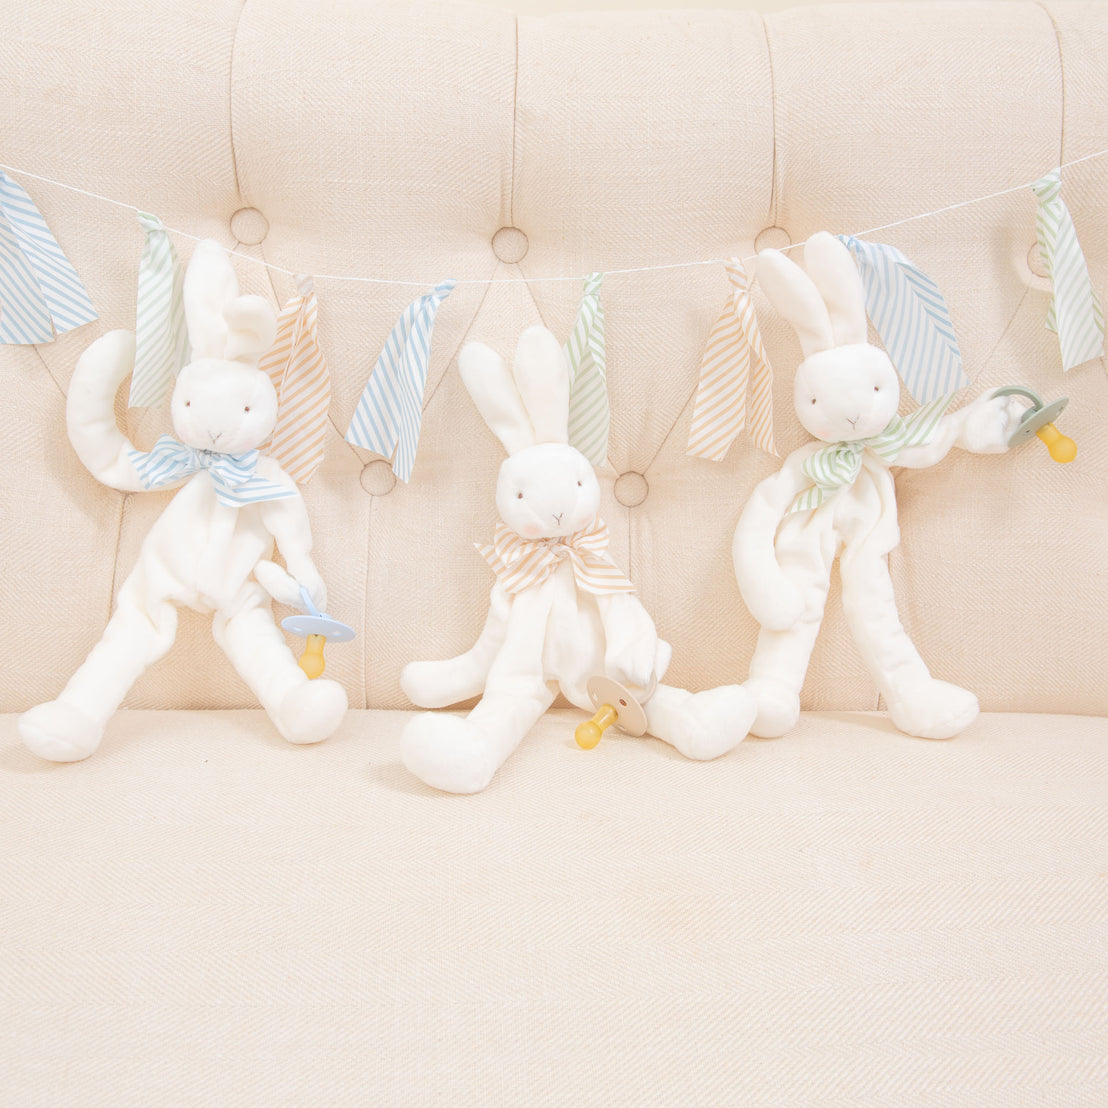 Flat lay photo of three Theodore Bunny Buddy Pacifier Holders. Stuffed animal floppy bunny made from a soft velour. Available colors include blue, green, and tan/white.